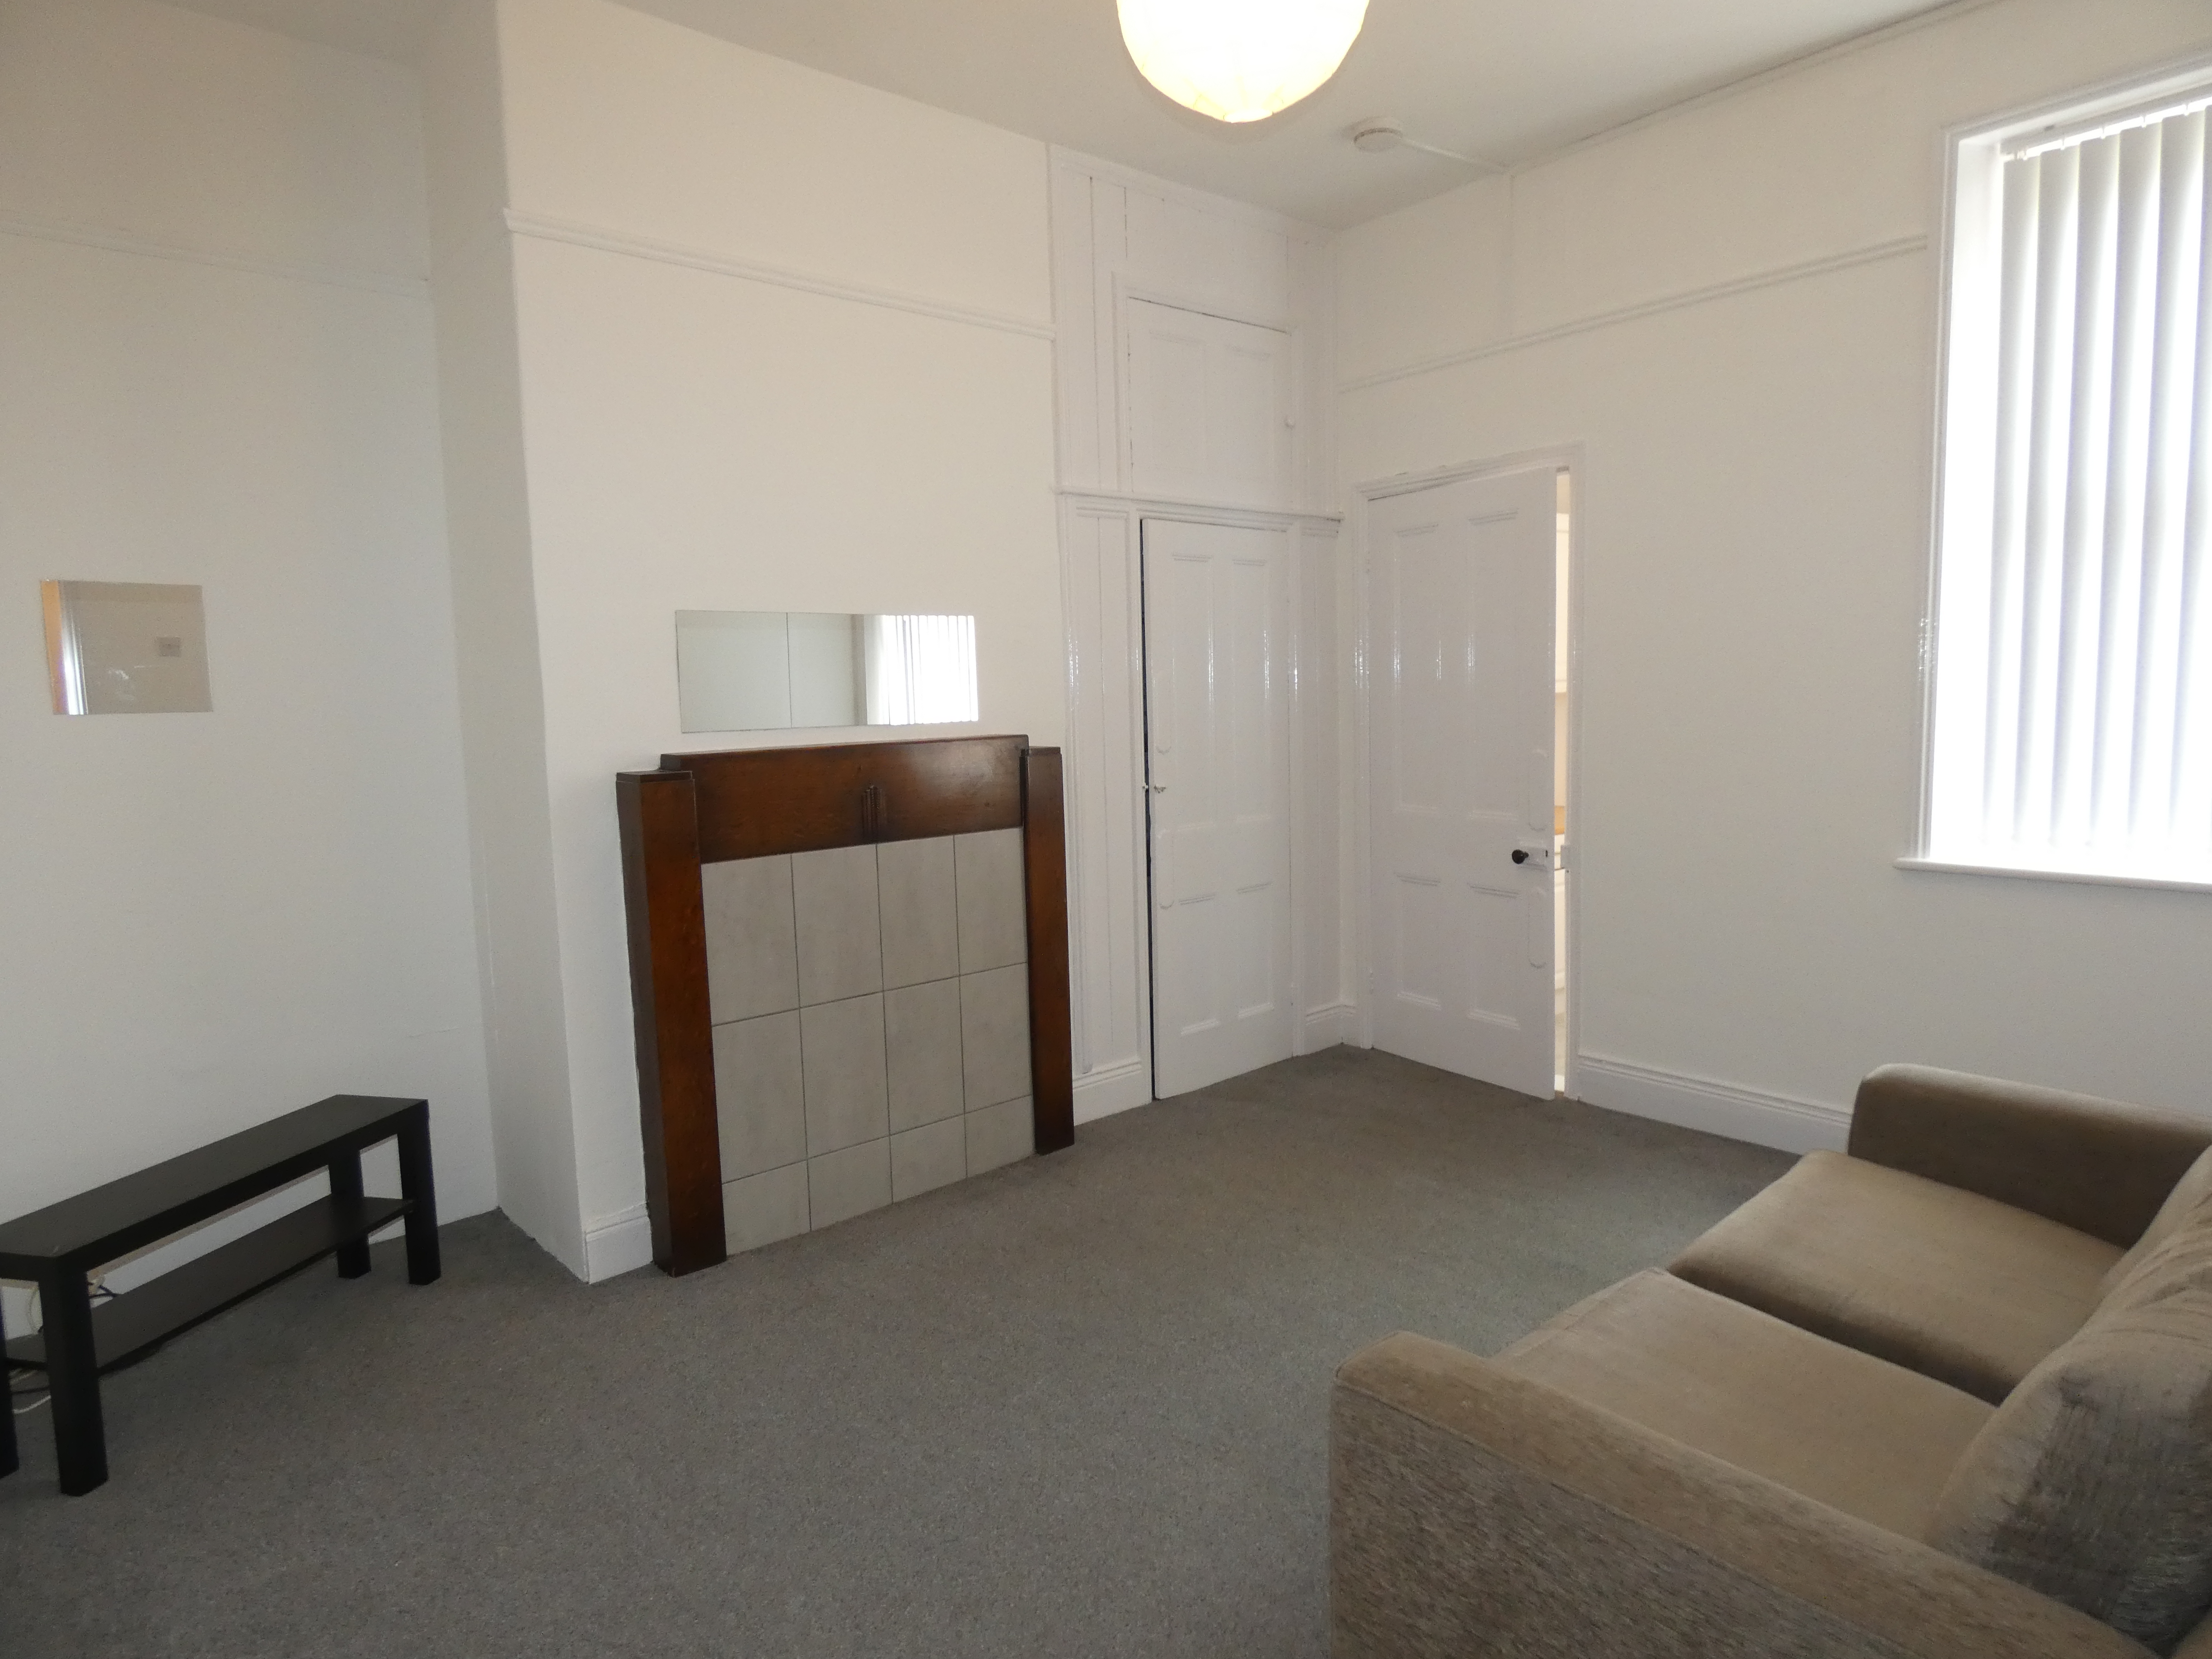 2 bed flat to rent in Cartington Terrace, Newcastle upon tyne  - Property Image 2